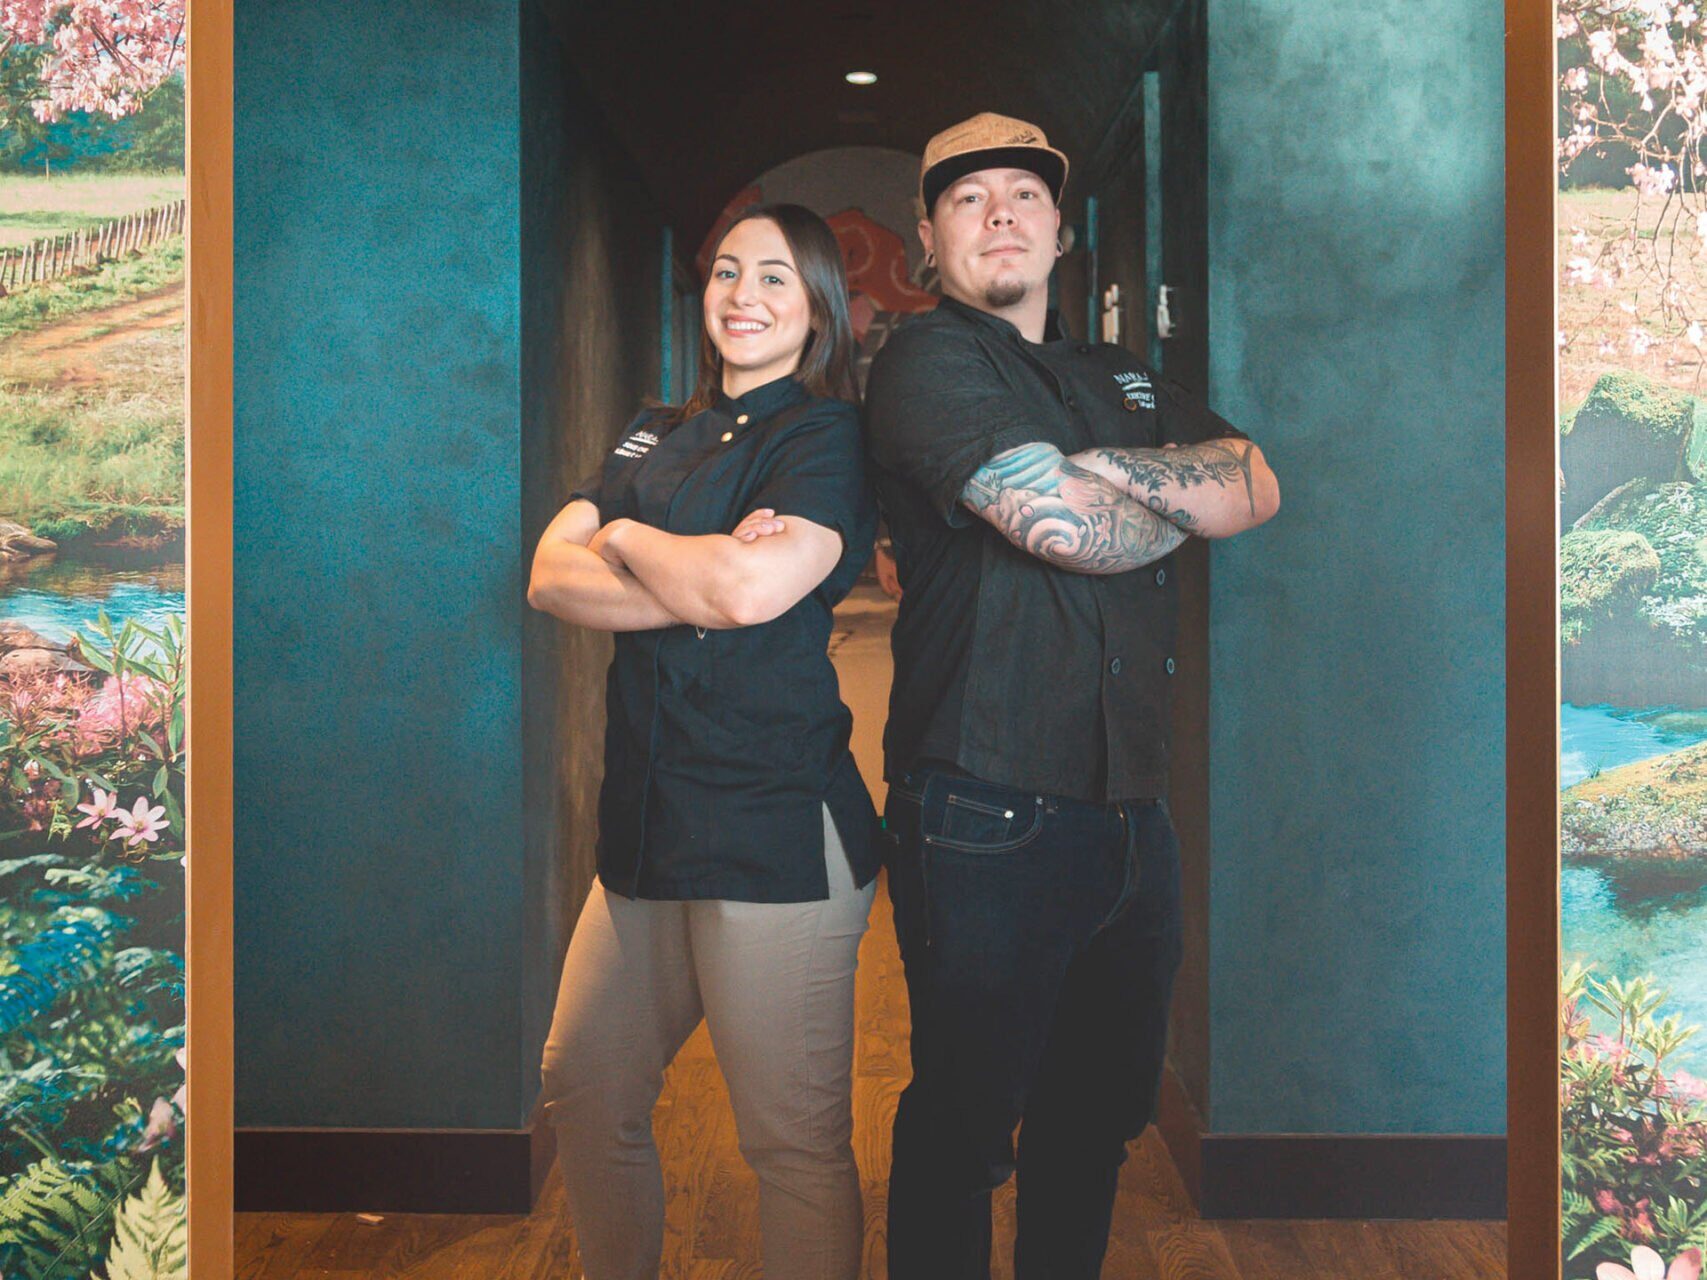 Sous chef Albani Caolo and executive chef Lucas Irwin